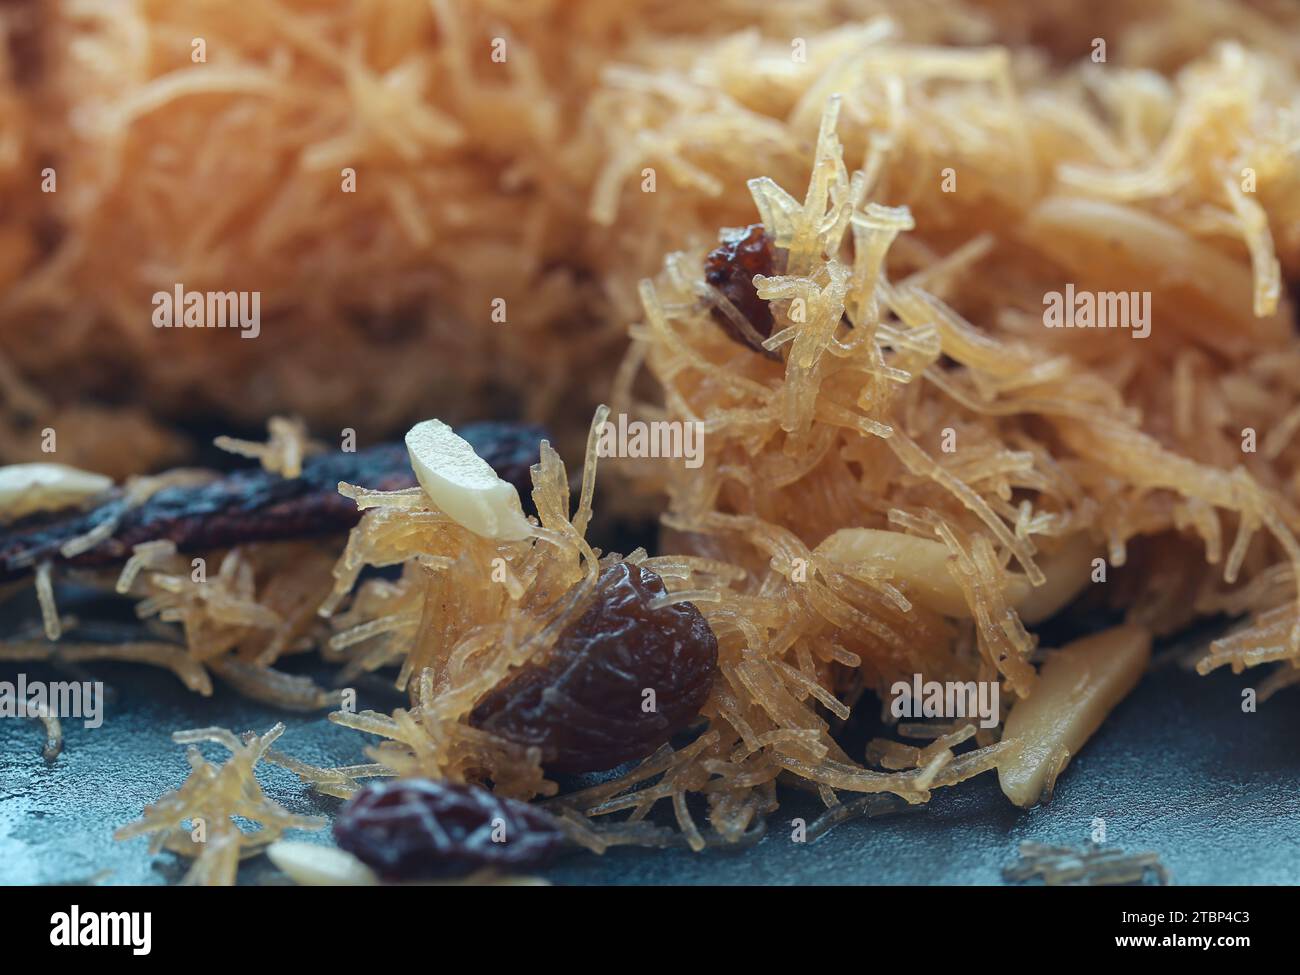 Freshly cooked delicious vermicelli ready to consume Stock Photo